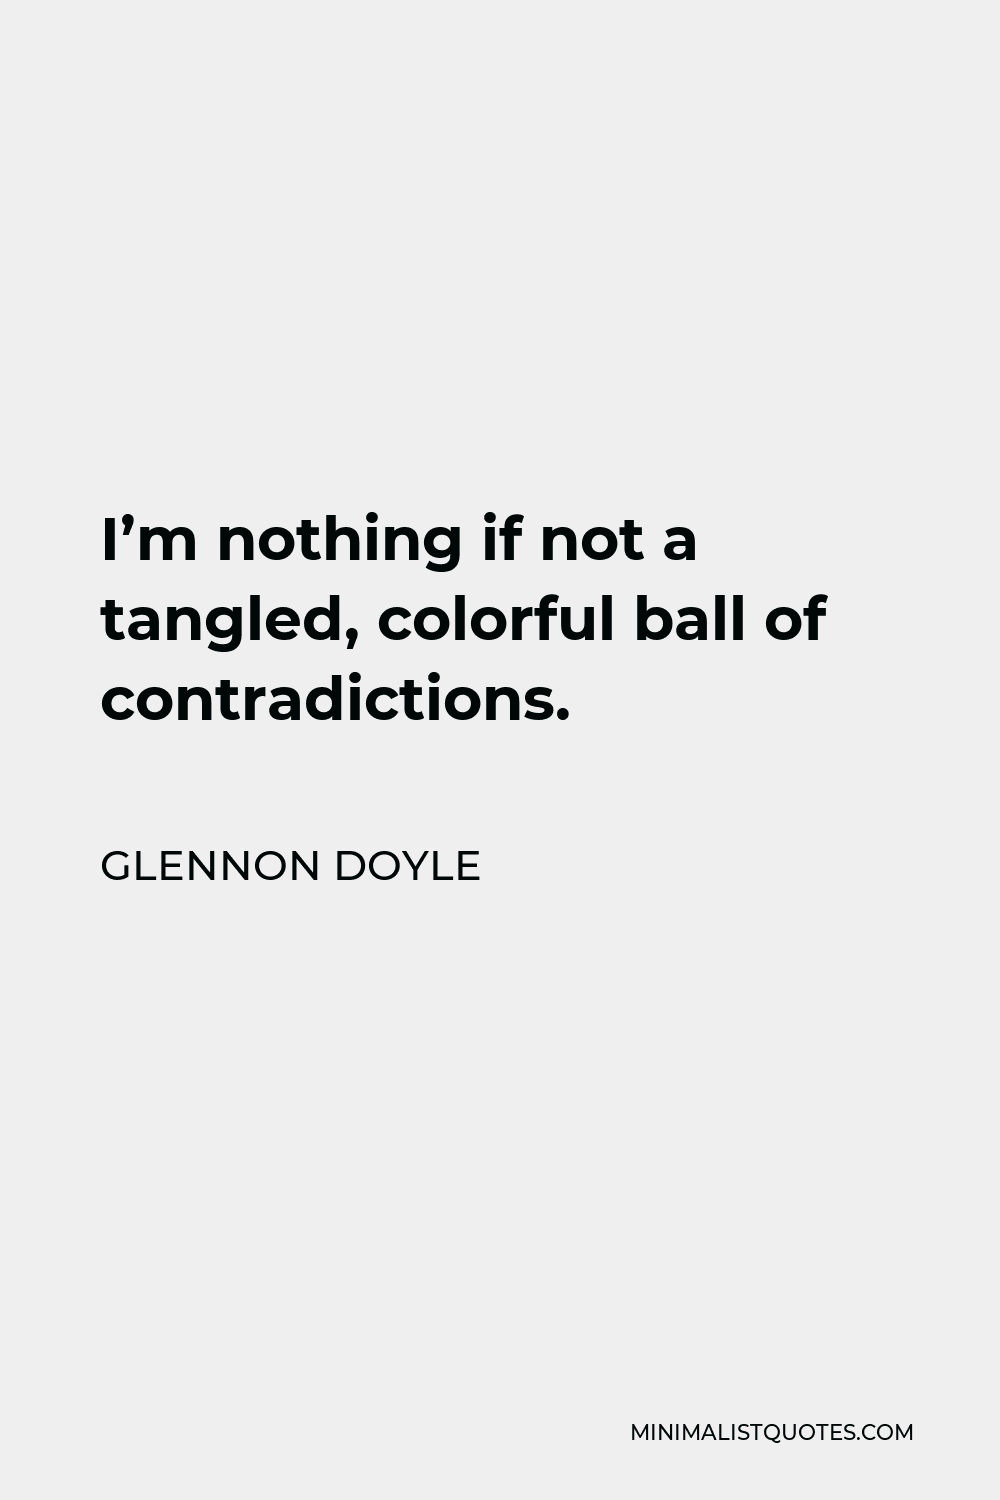 Glennon Doyle Quote - I’m nothing if not a tangled, colorful ball of contradictions.